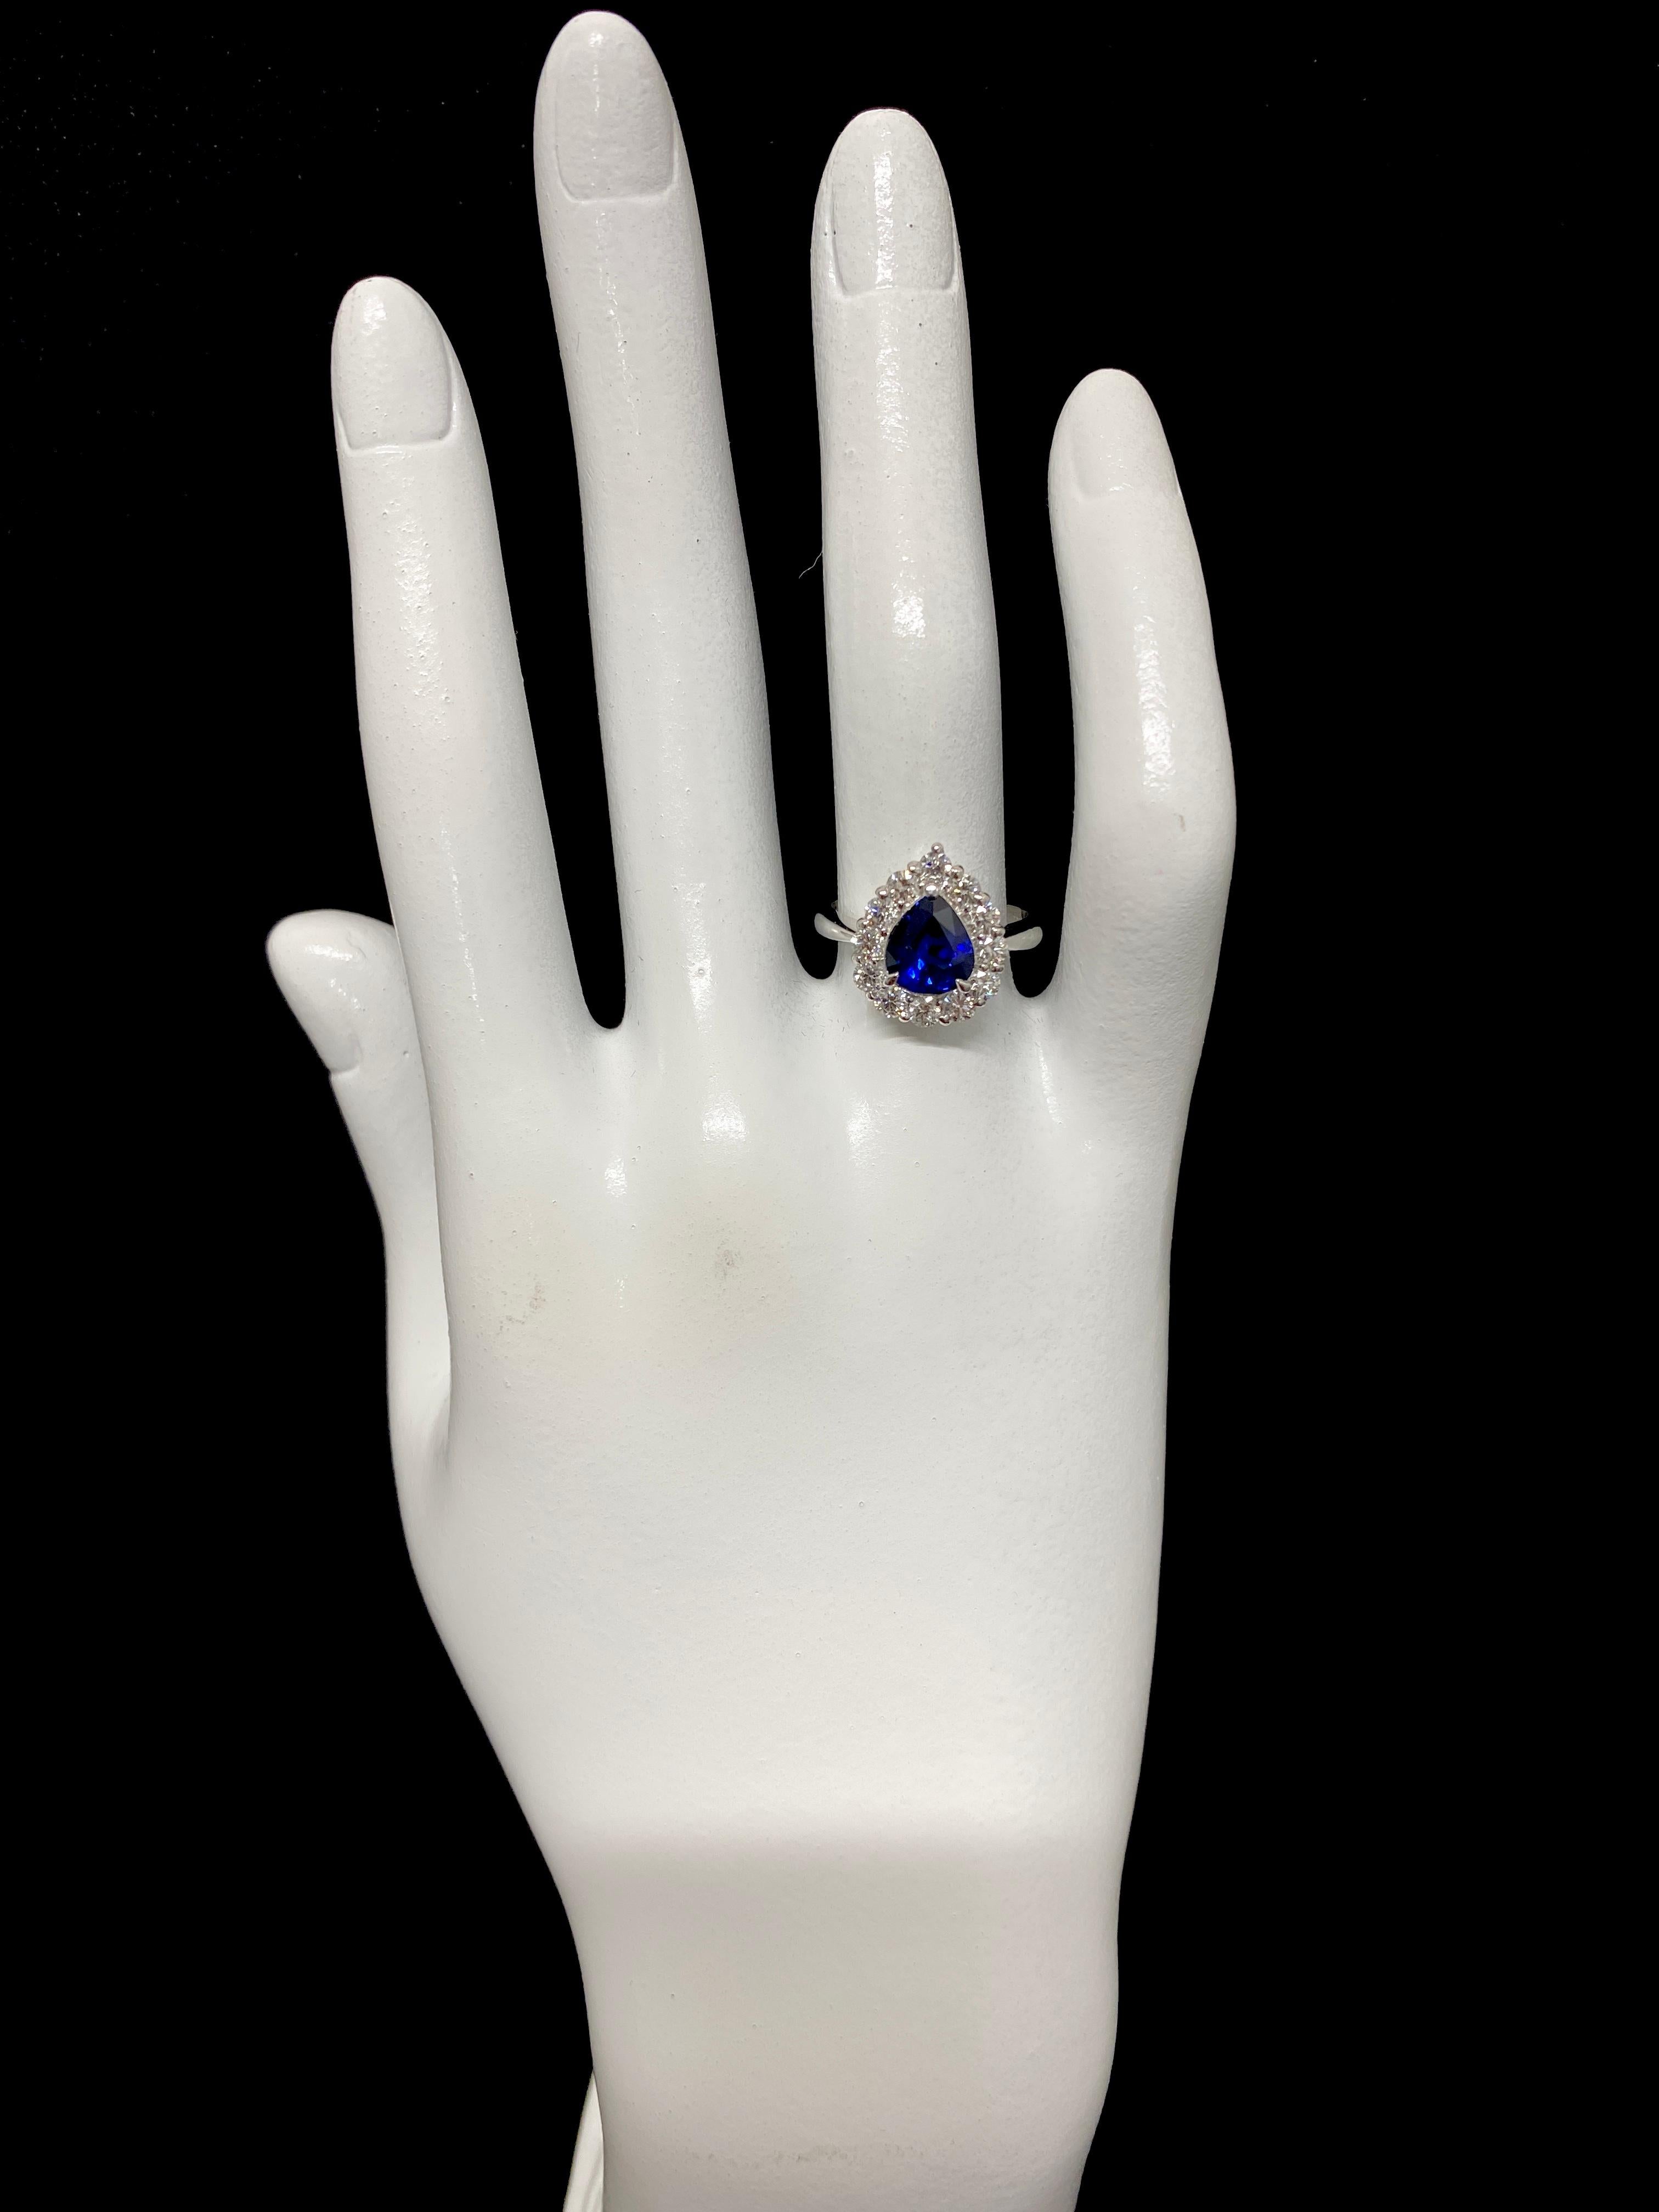 GIA Certified 1.58 Carat Natural Ceylon Royal Blue Sapphire Ring Set in Platinum For Sale 1